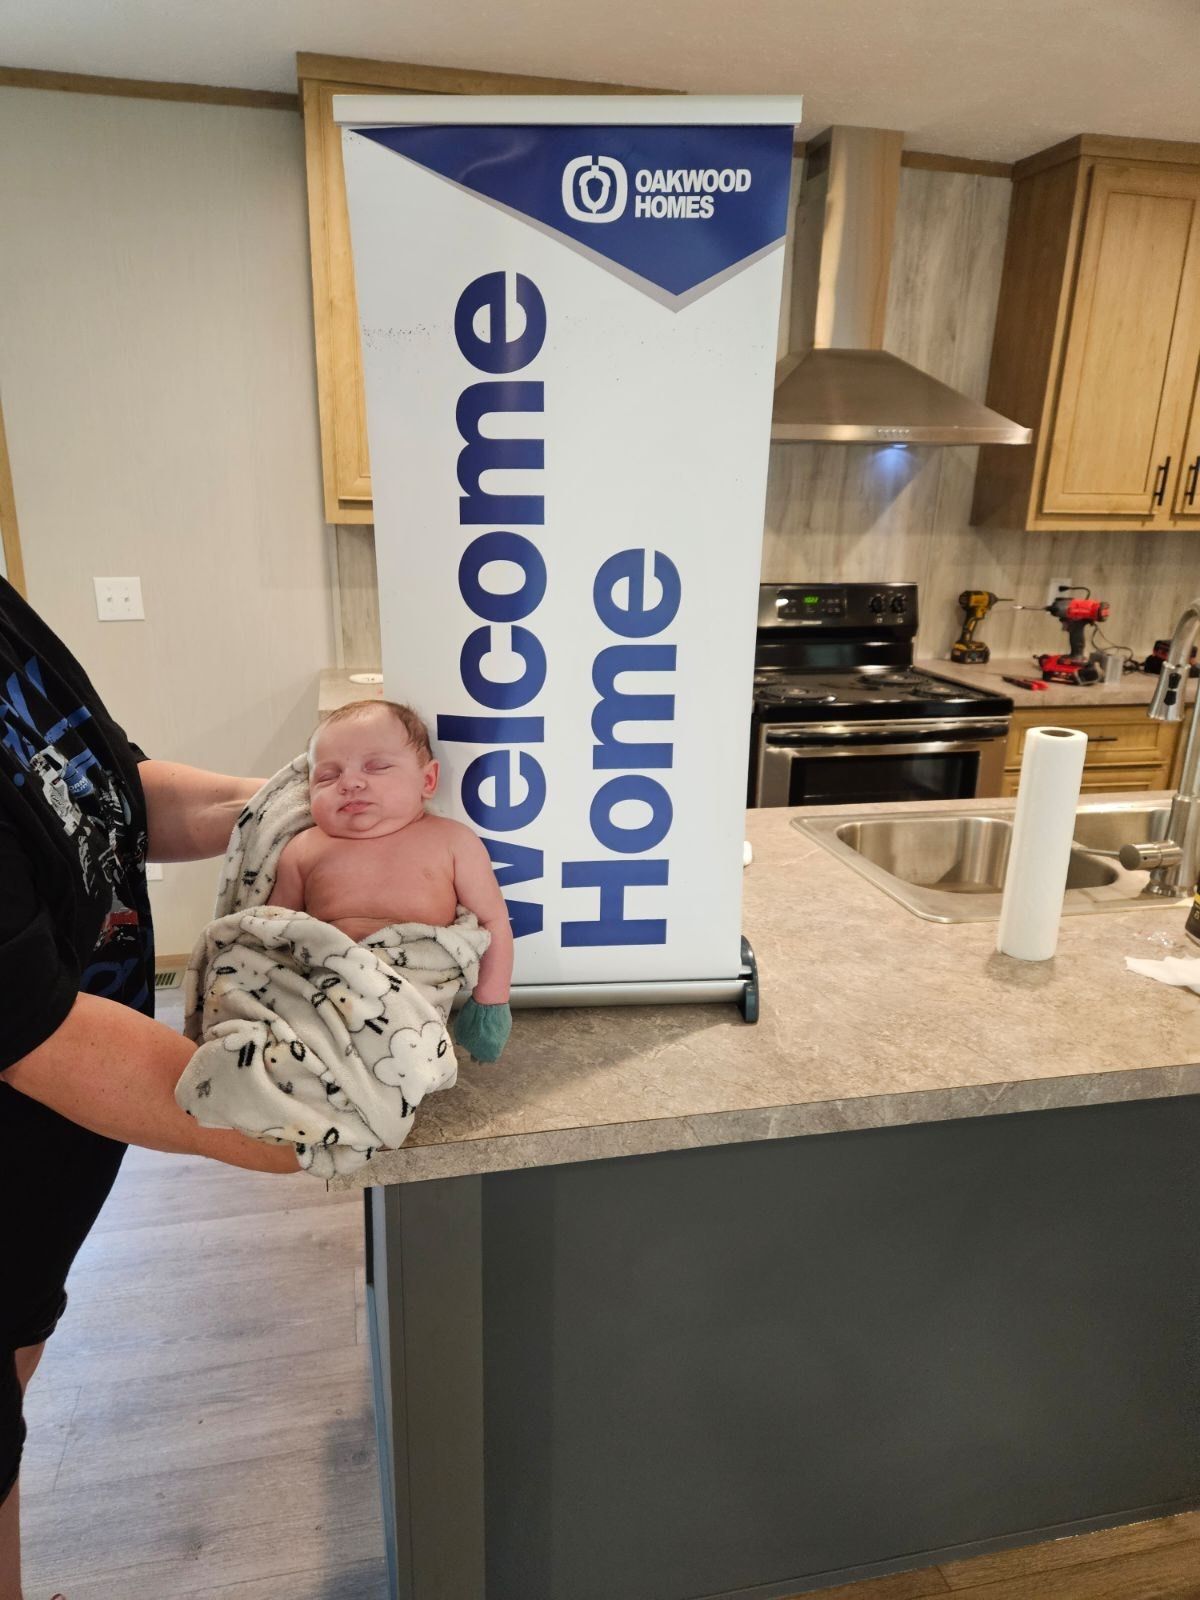 Andrew S. welcome home image